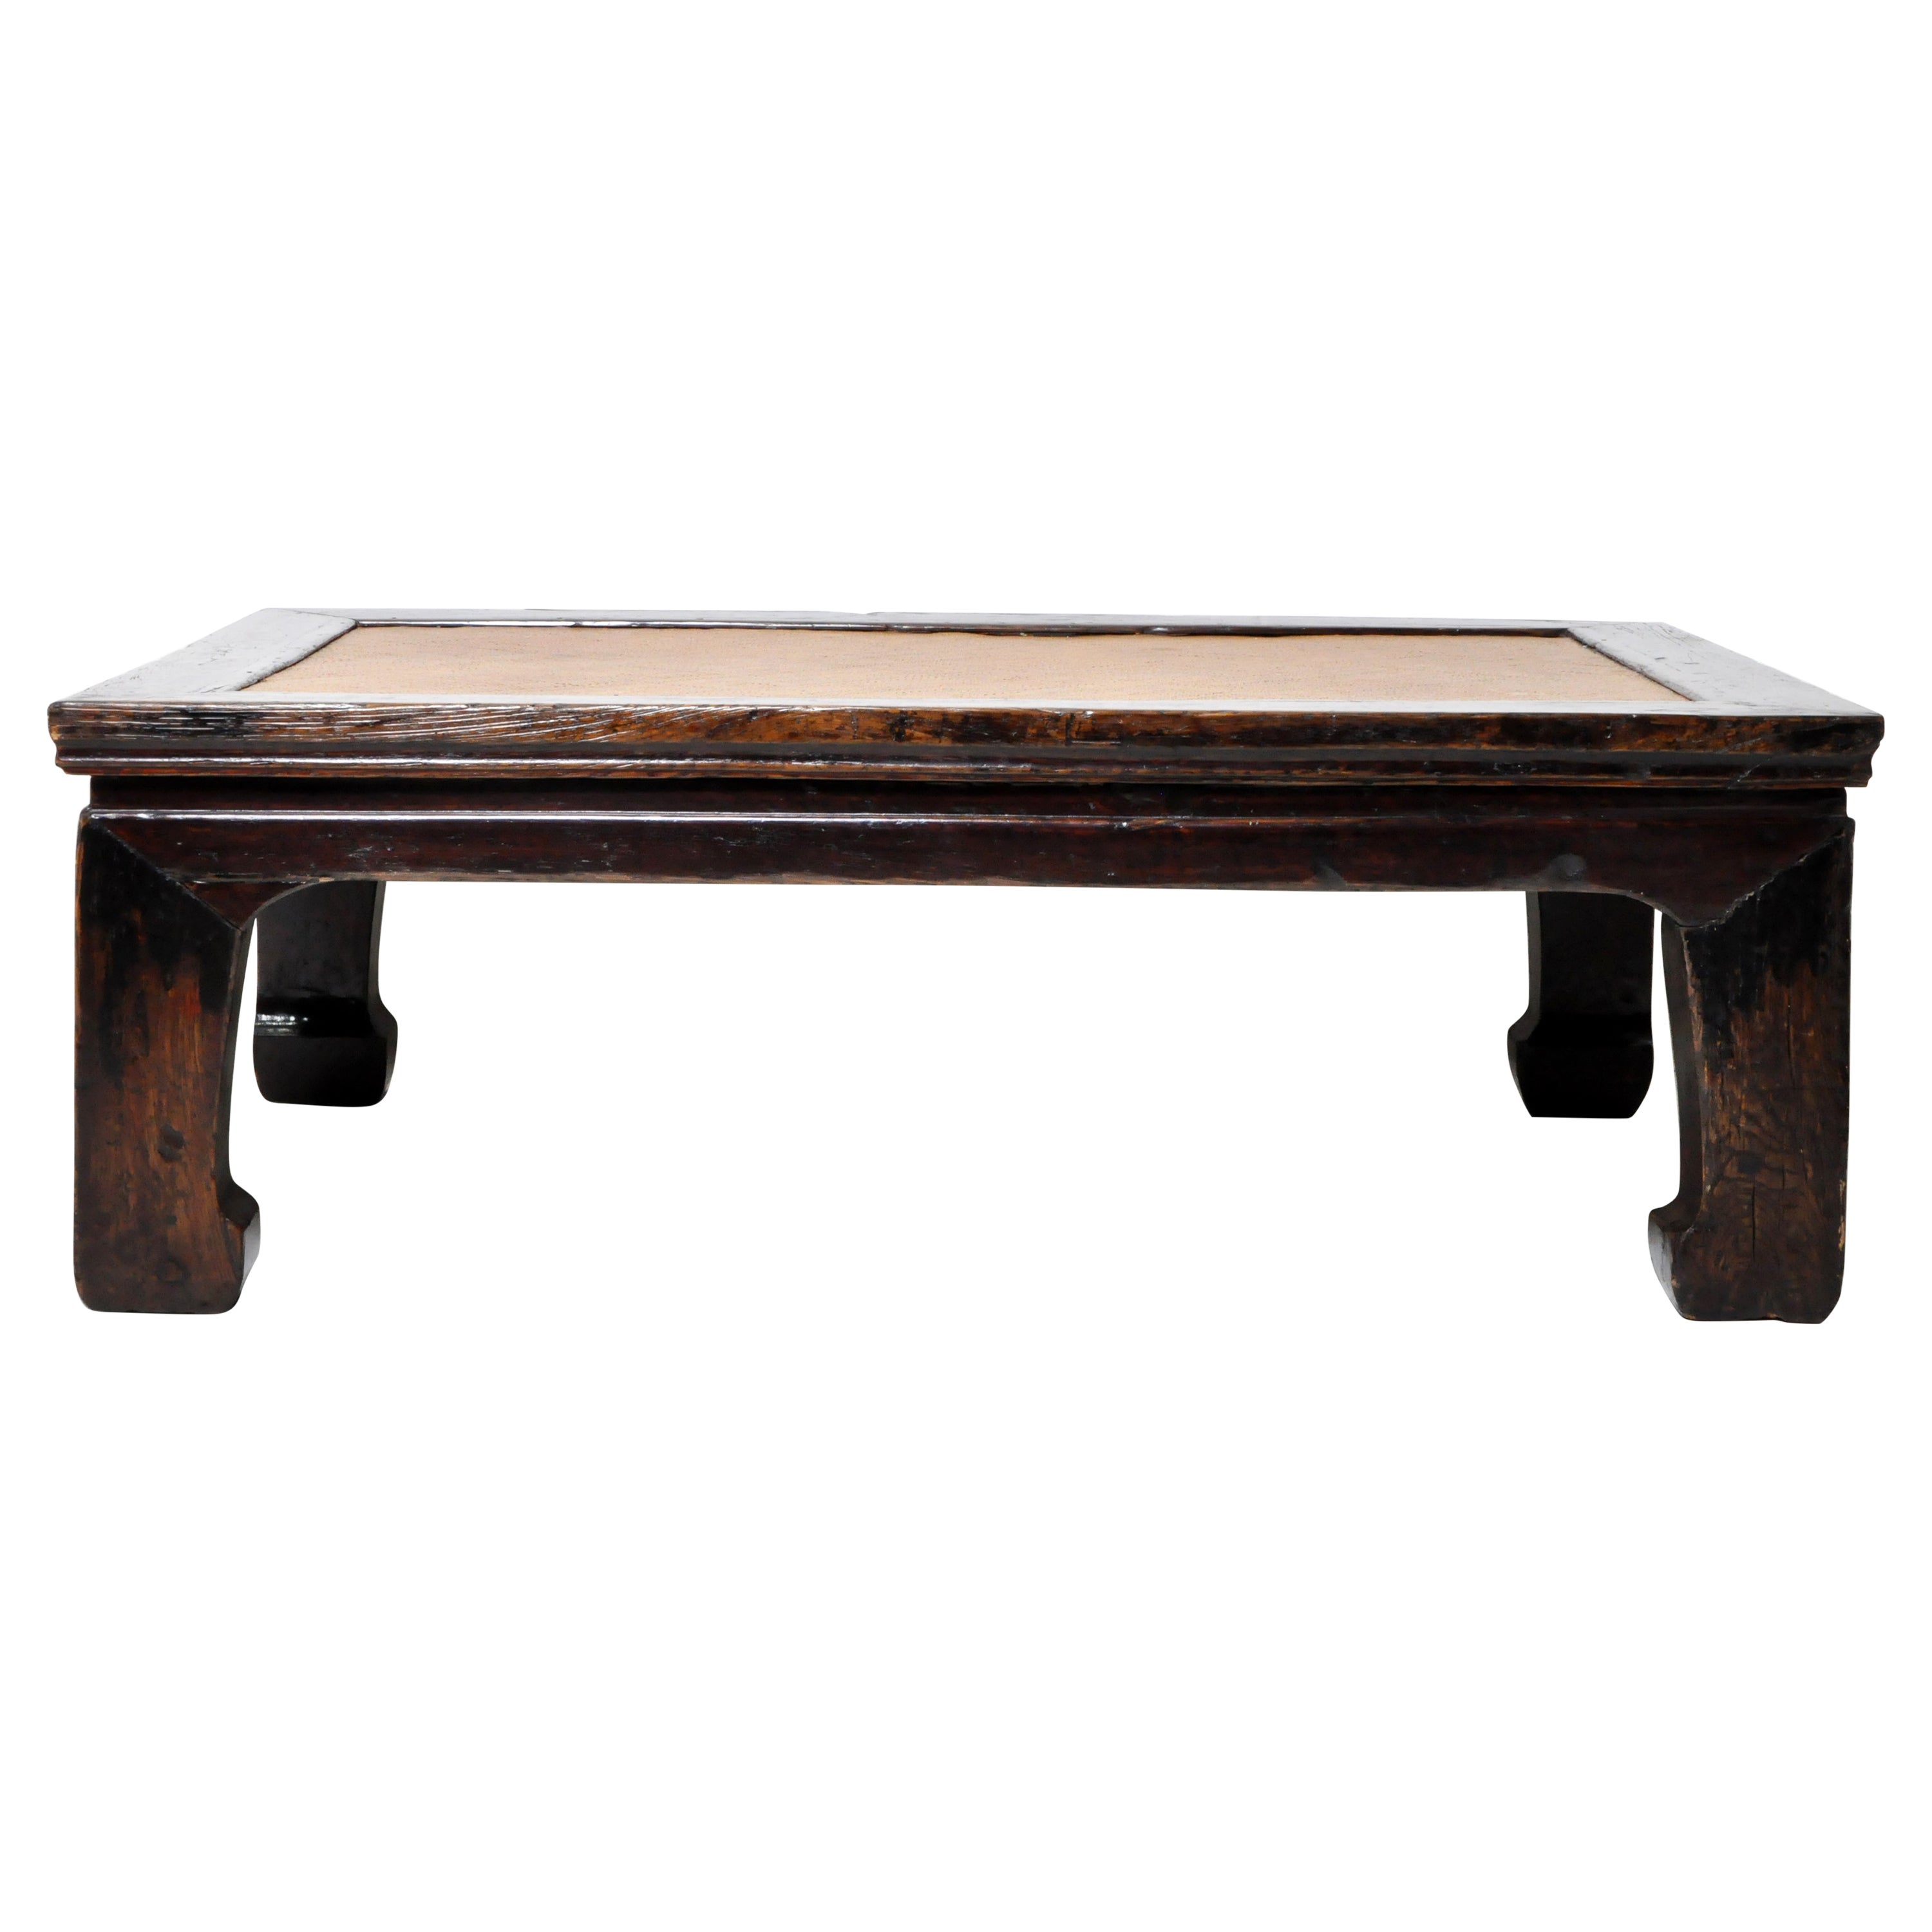 Chinese Daybed Coffee Table